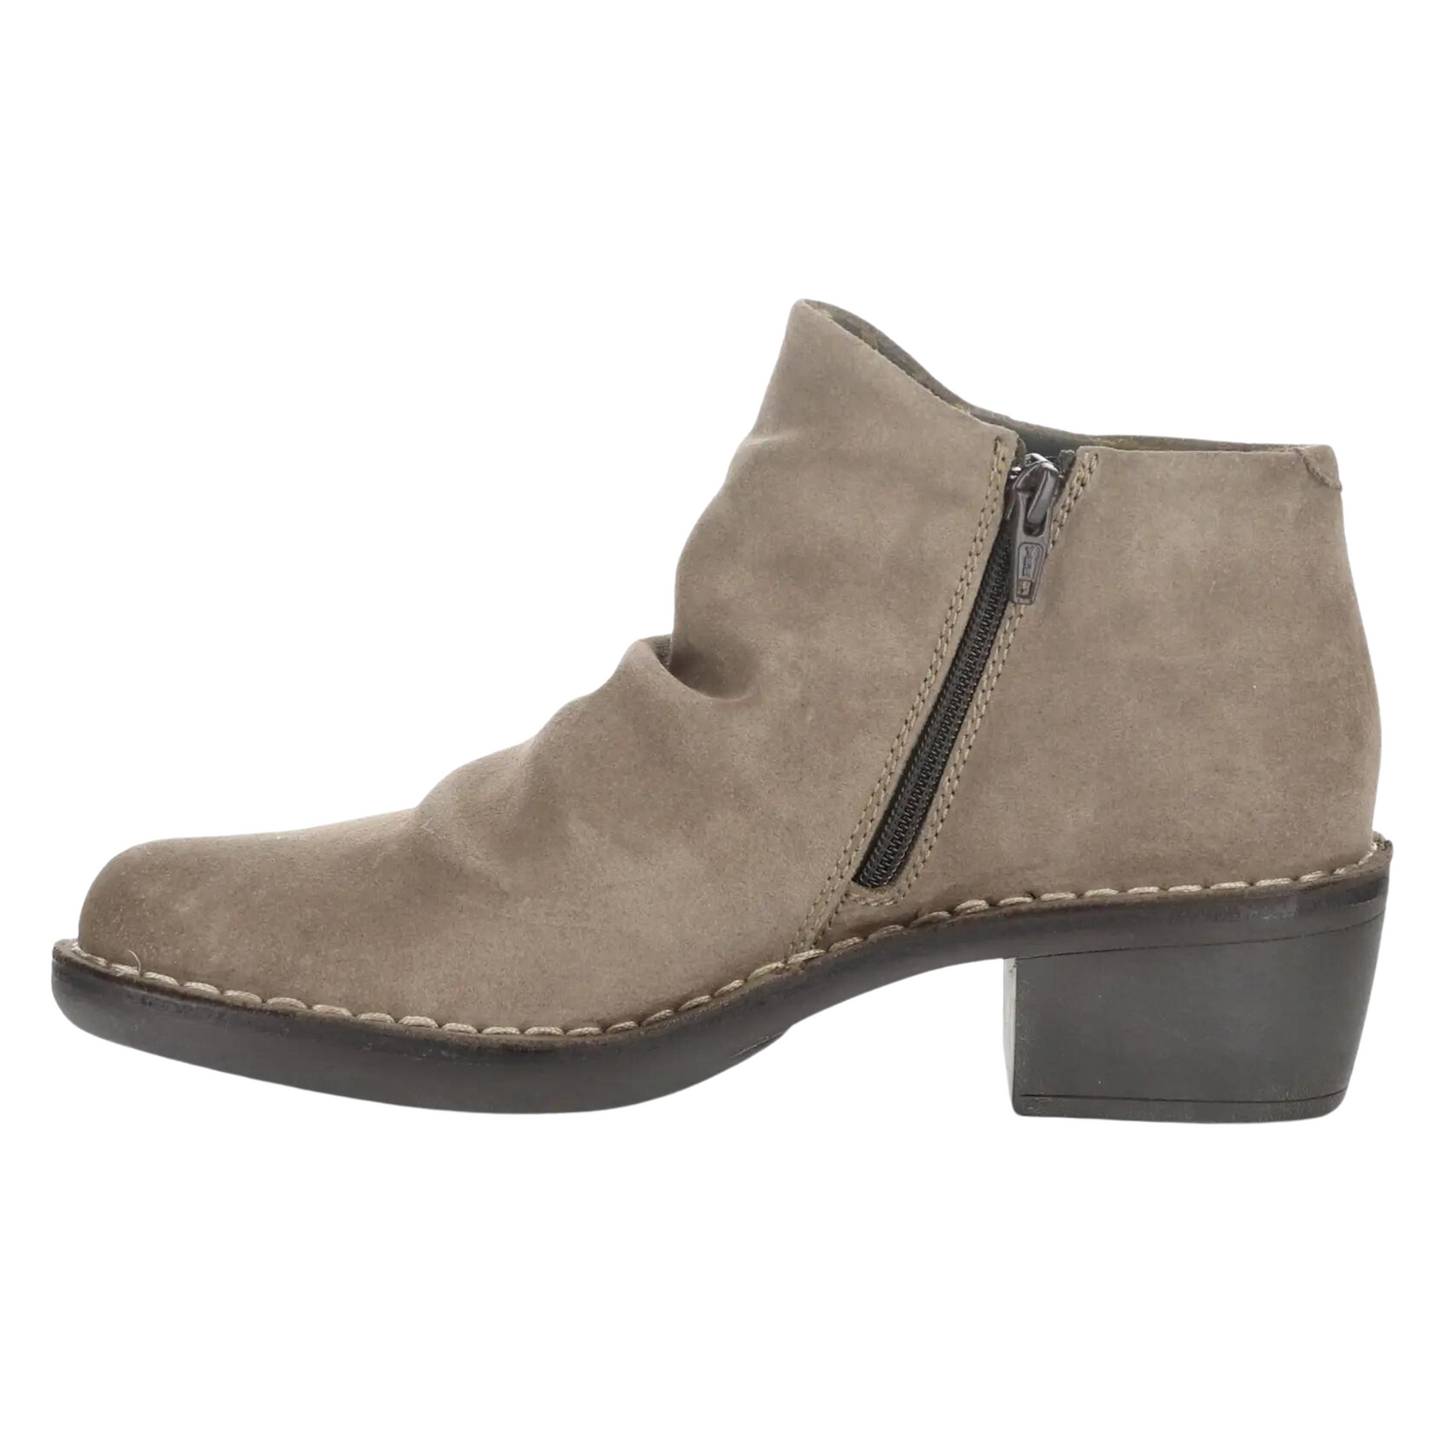 Left side profile of the Fly London Merk Boot in the colour Taupe.